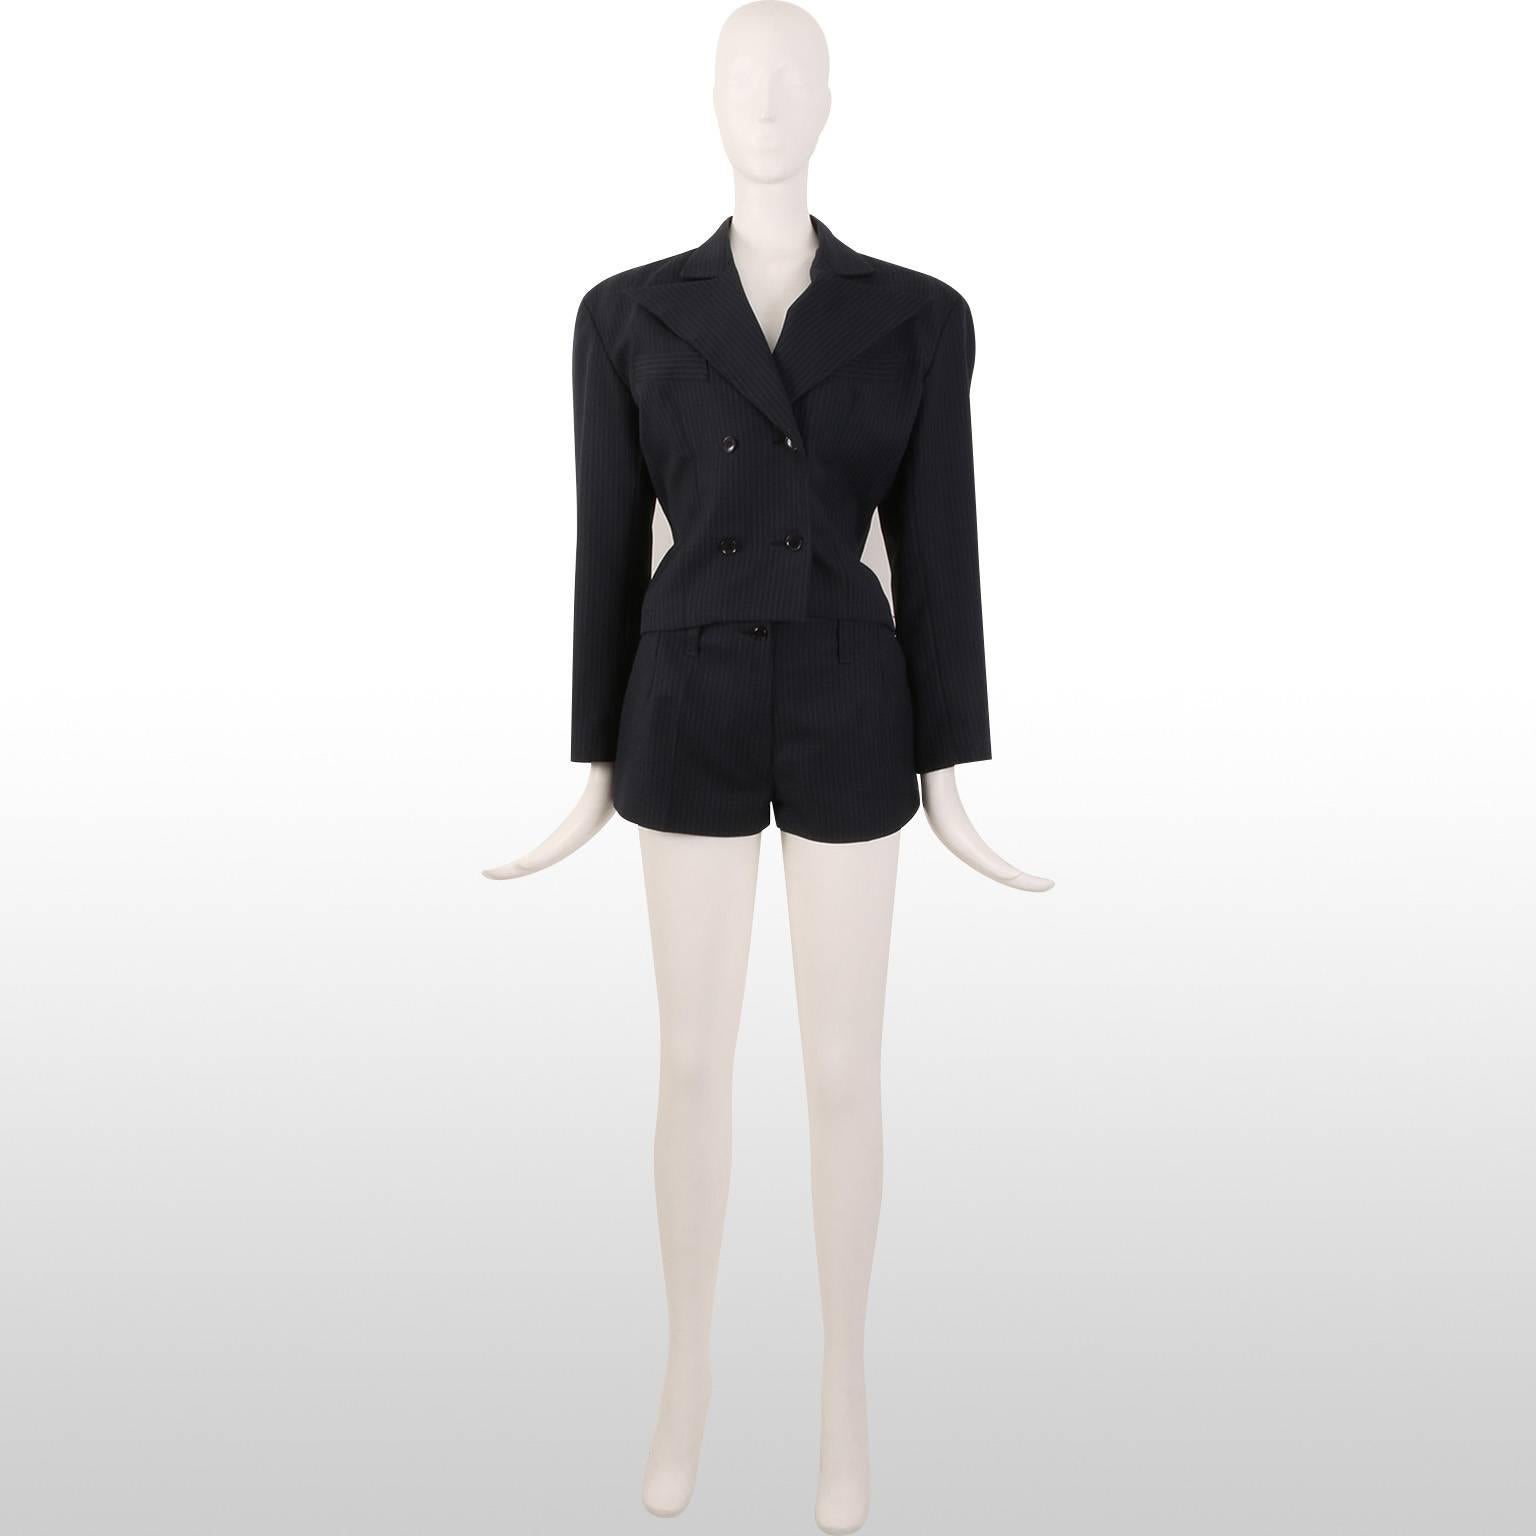 This 80s three piece - jacket, mini shorts and skirt suit by John Richmond was part of the era in which the designer dressed celebrities such as Madonna, Mick Jagger and even Alice Cooper. During this time John Richmond was known for feeding the